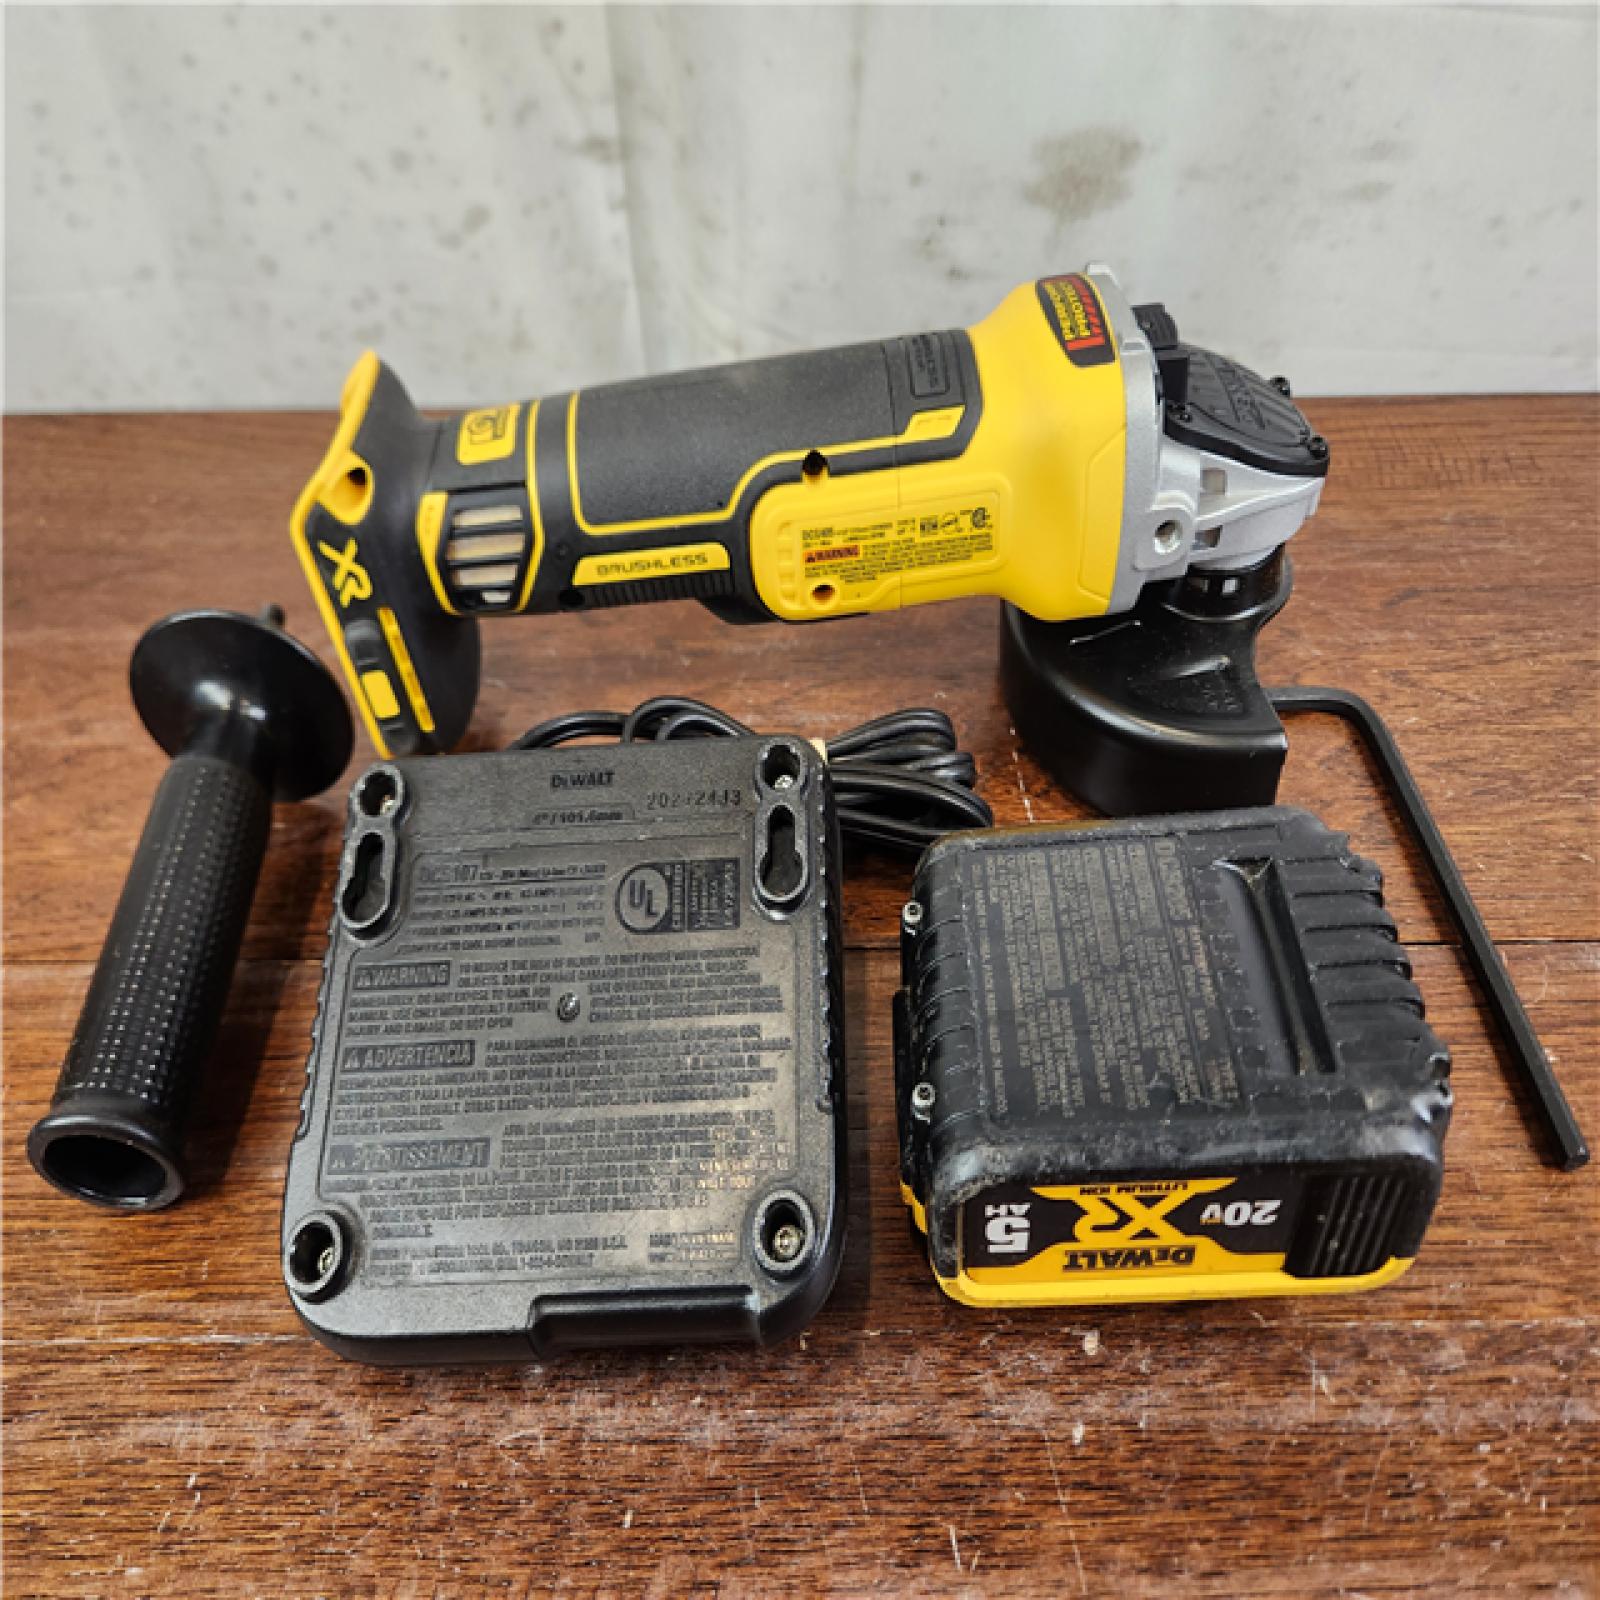 AS-IS DEWALT 20V MAX XR Brushless Cordless 4-1/2 in. Small Angle Grinder w/ (1) Battery And Charger